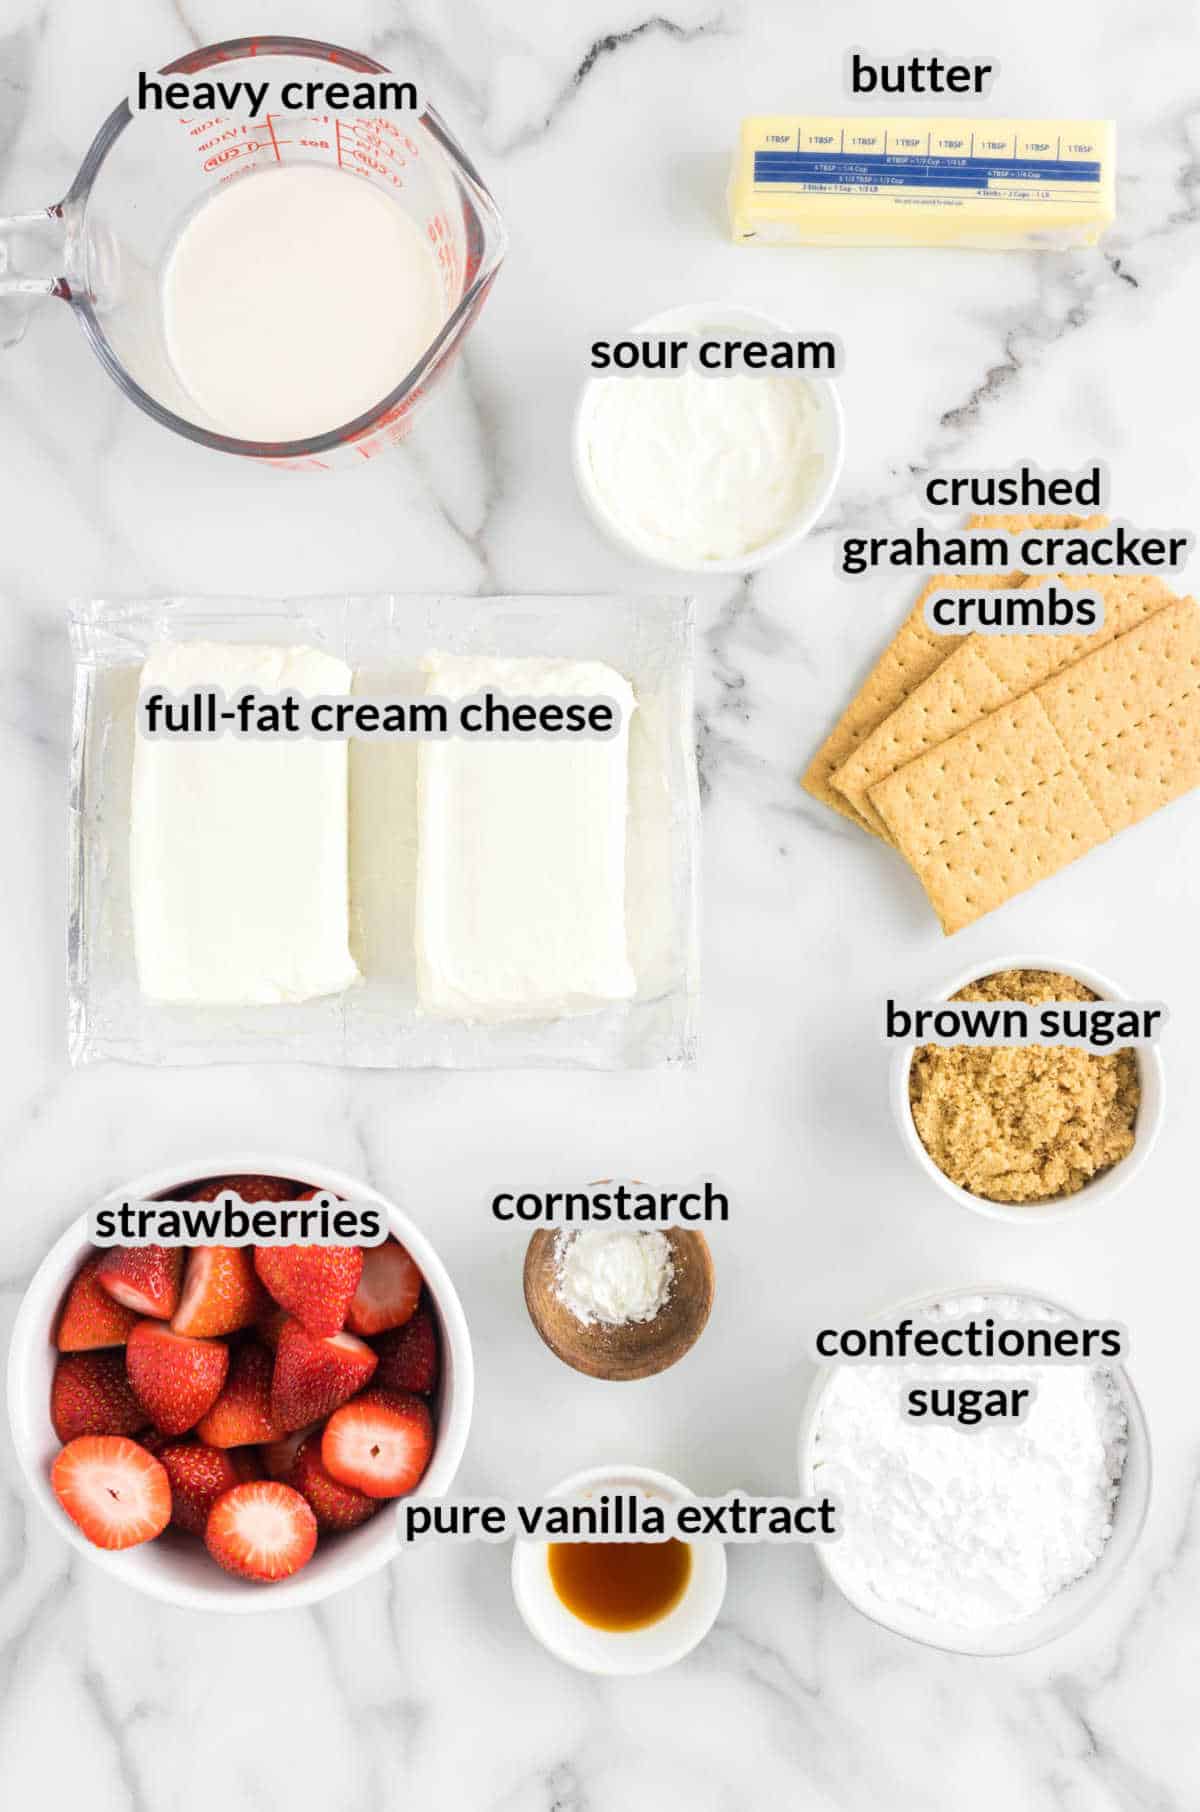 Overhead Image of No Bake Strawberry Cheesecake Ingredients